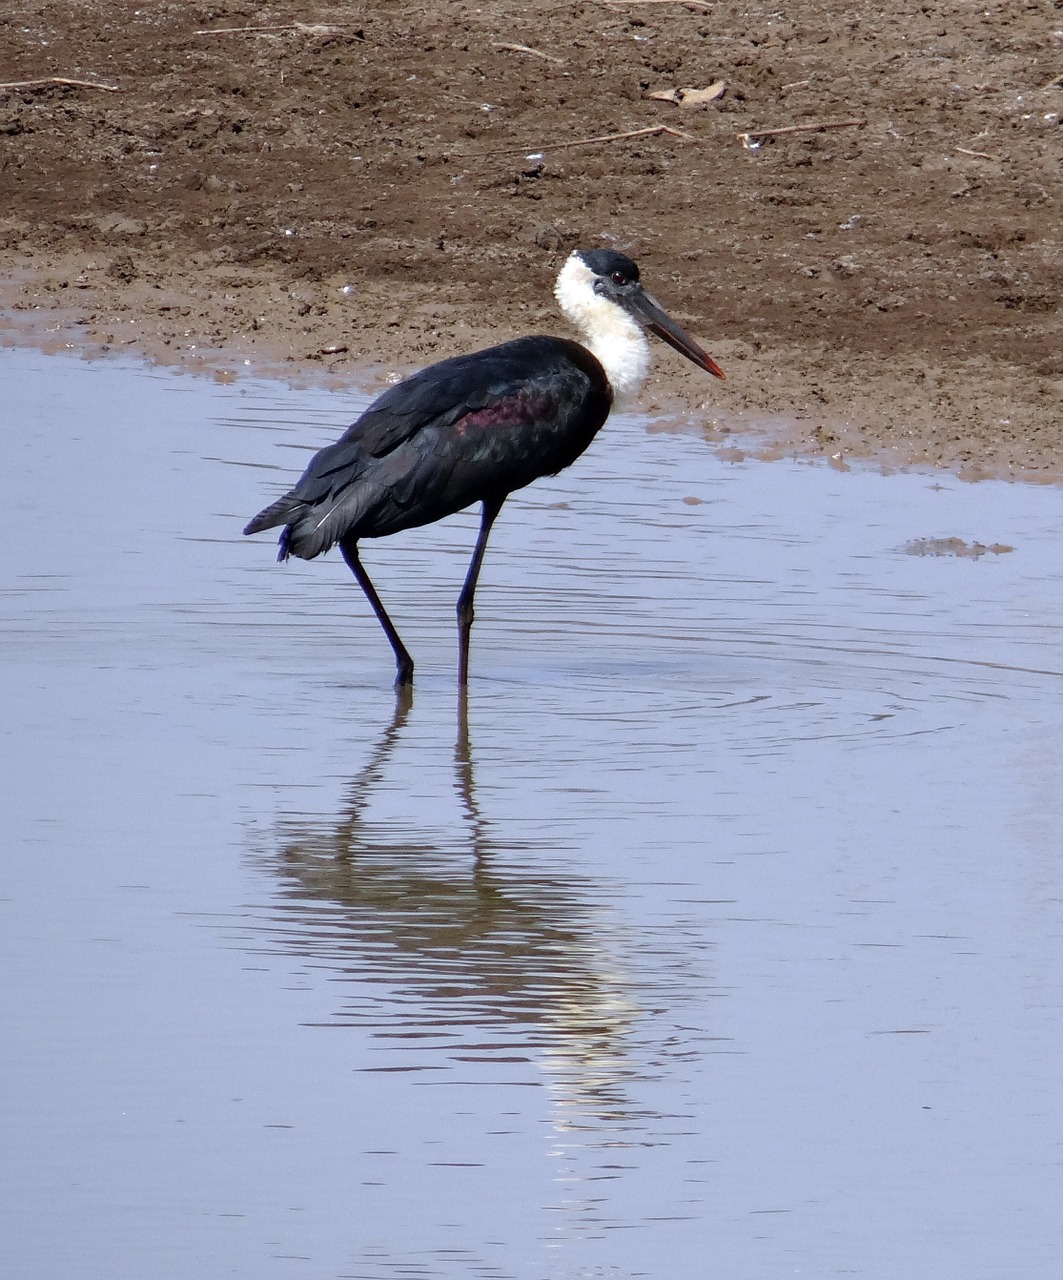 stork woolly necked ciconia free photo